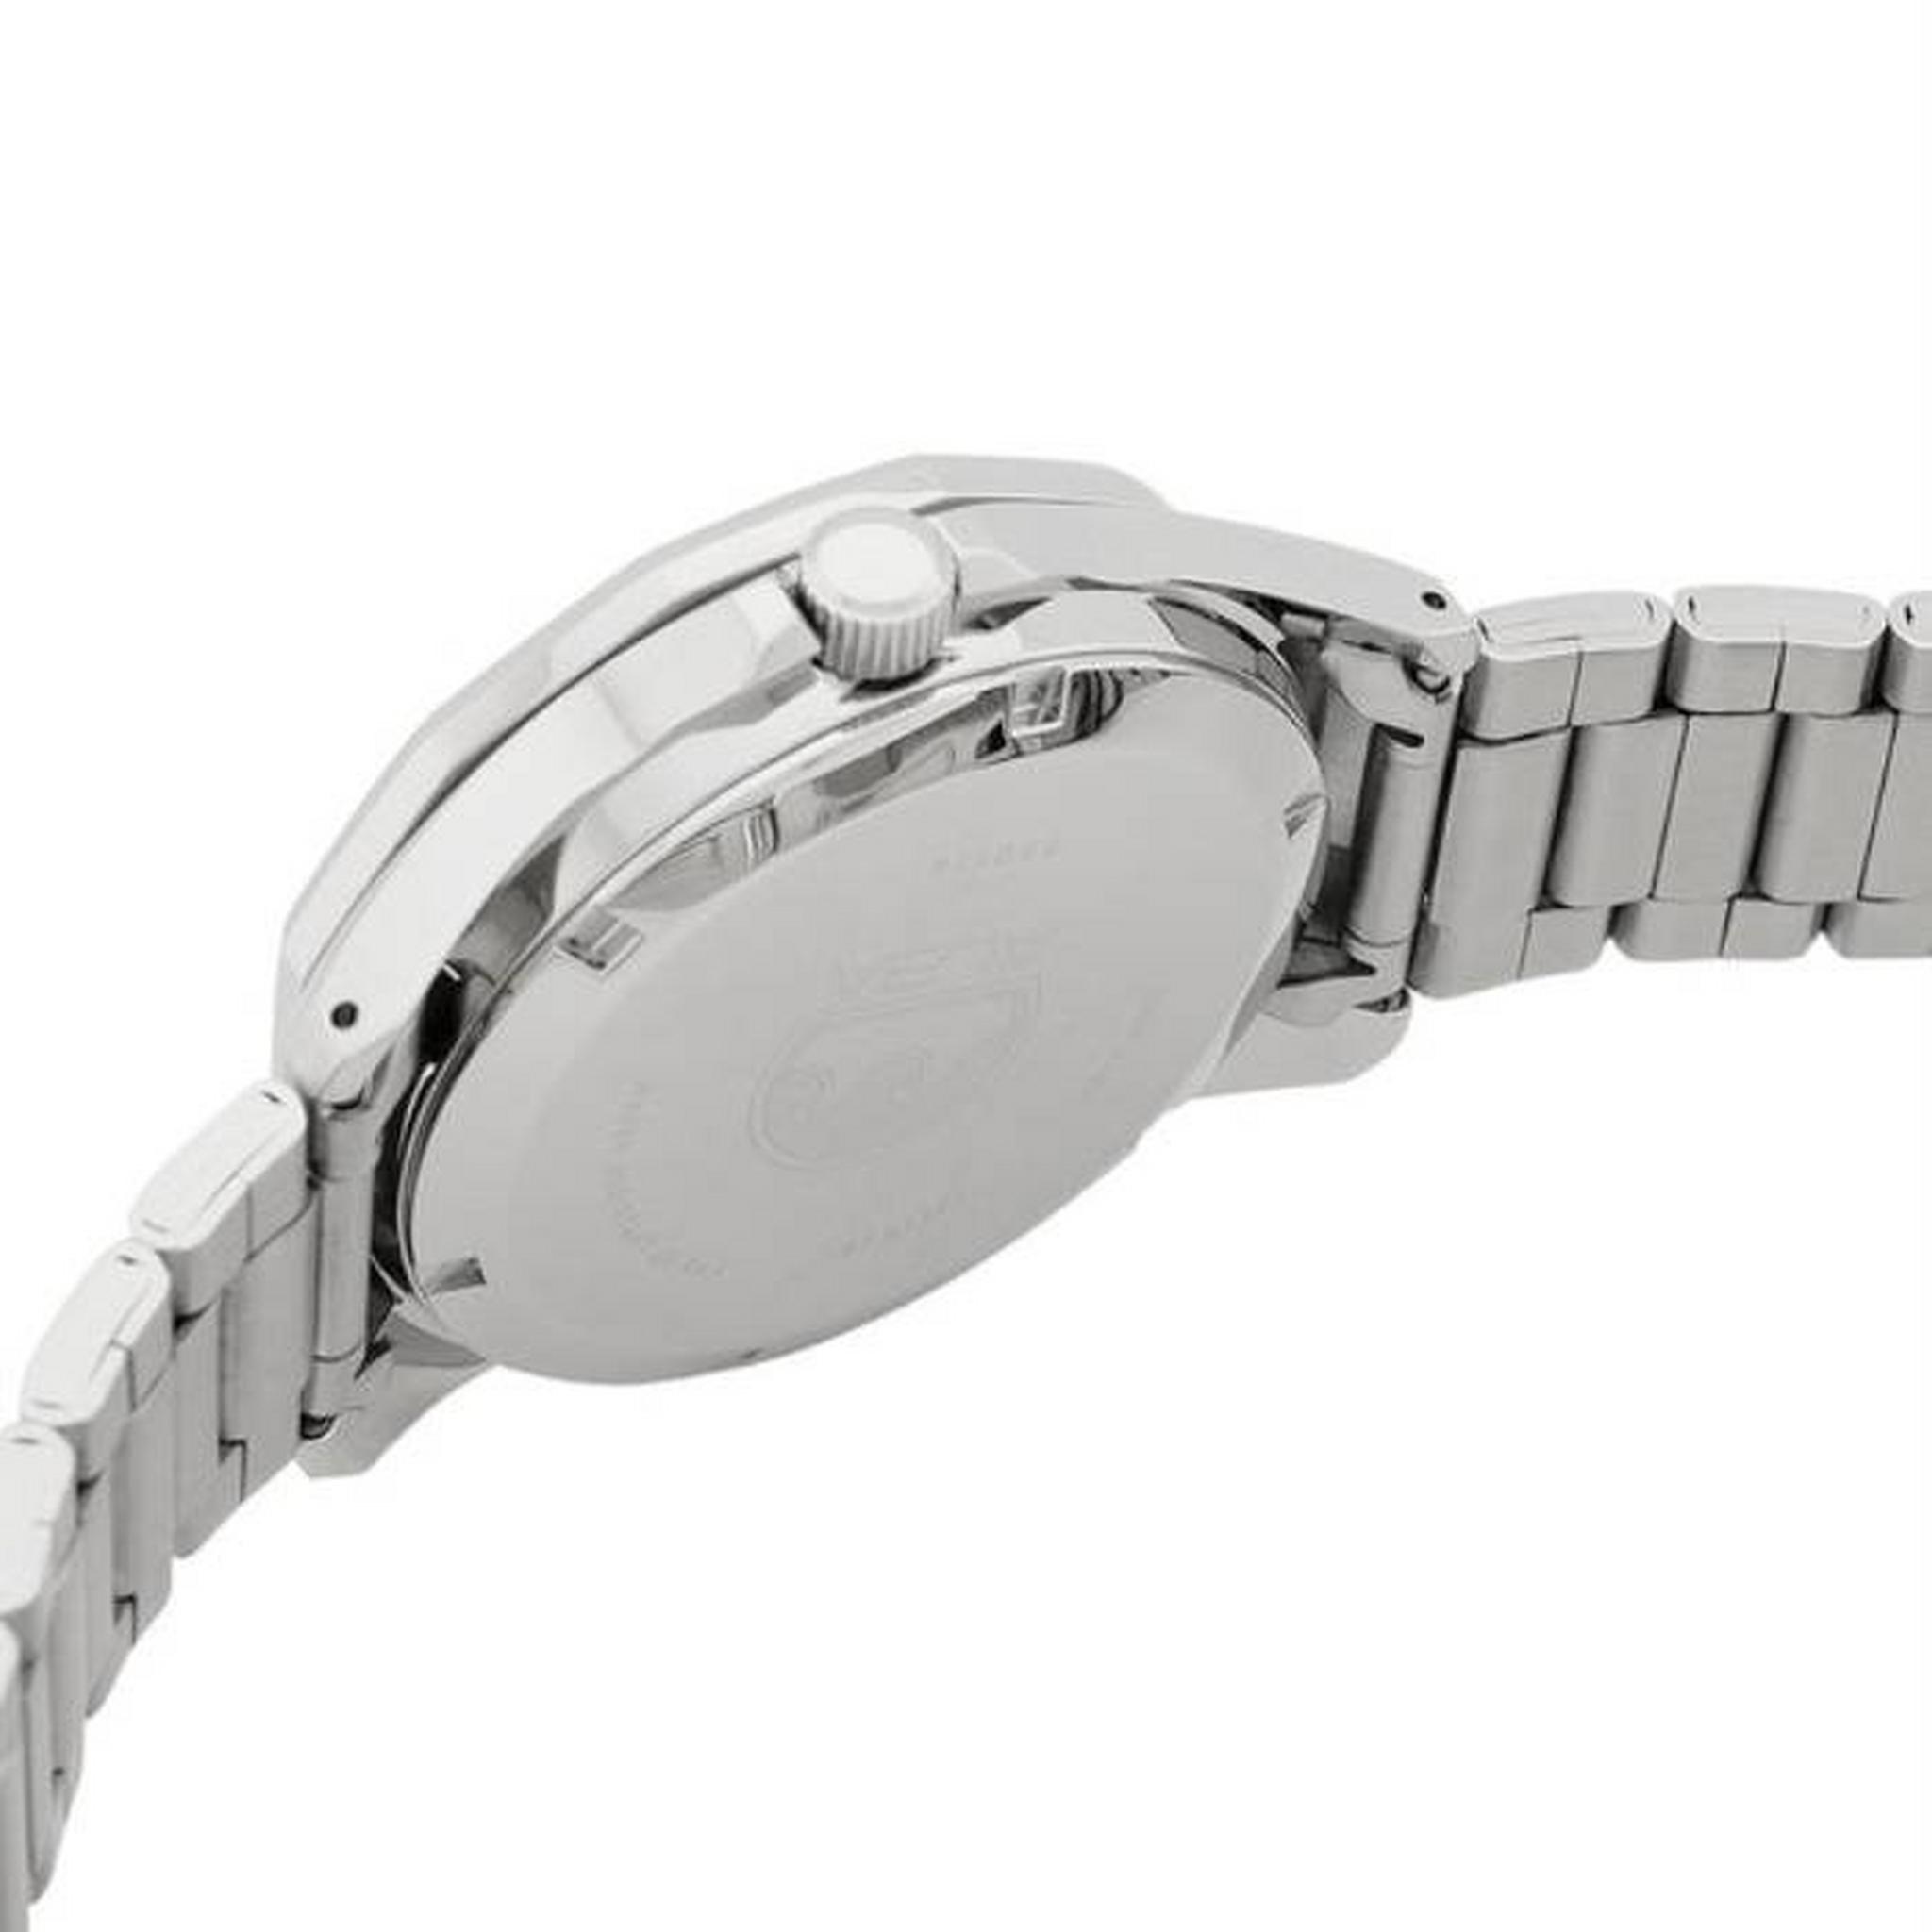 Alba Mechanical Watch for Men, Analog, 43mm, Stainless Steel Strap, AL4455X1 – Silver